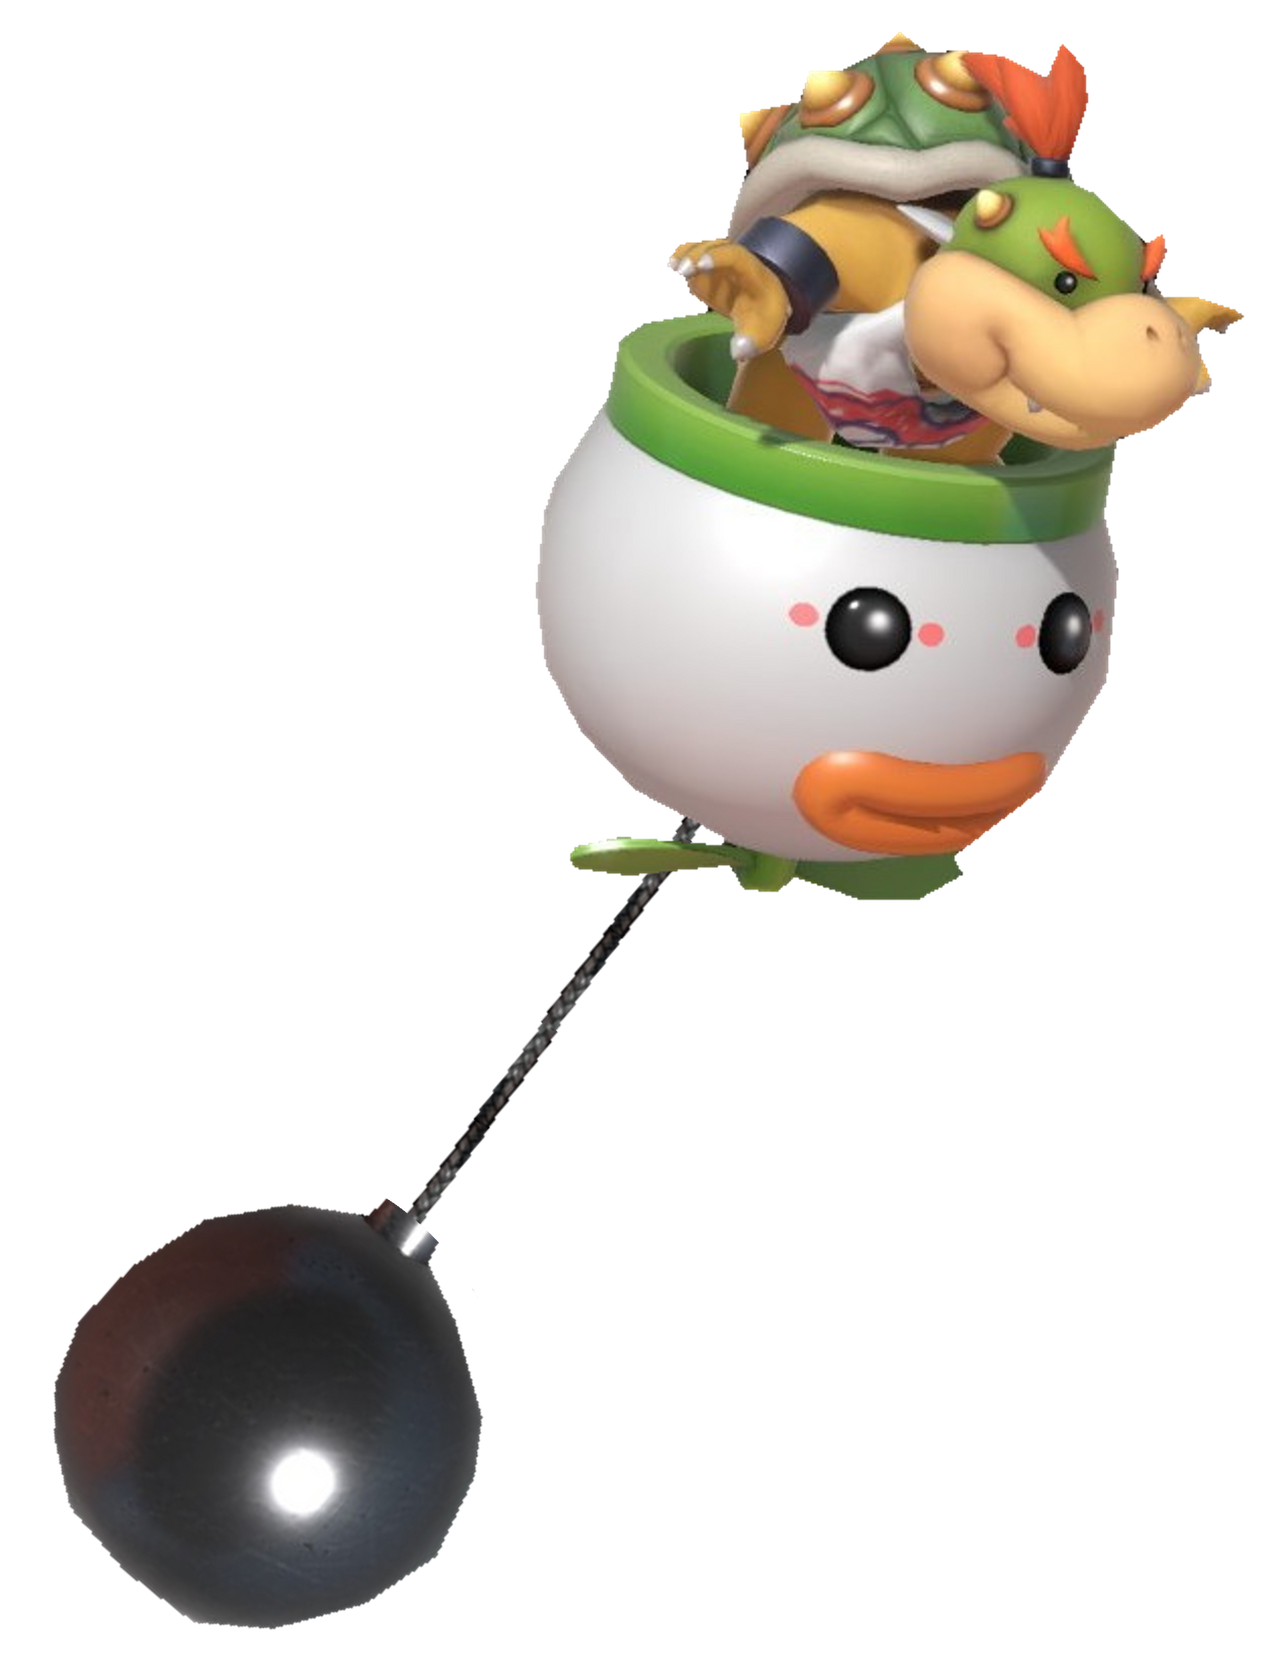 Bowser Jr with an iron ball by TransparentJiggly64 on DeviantArt